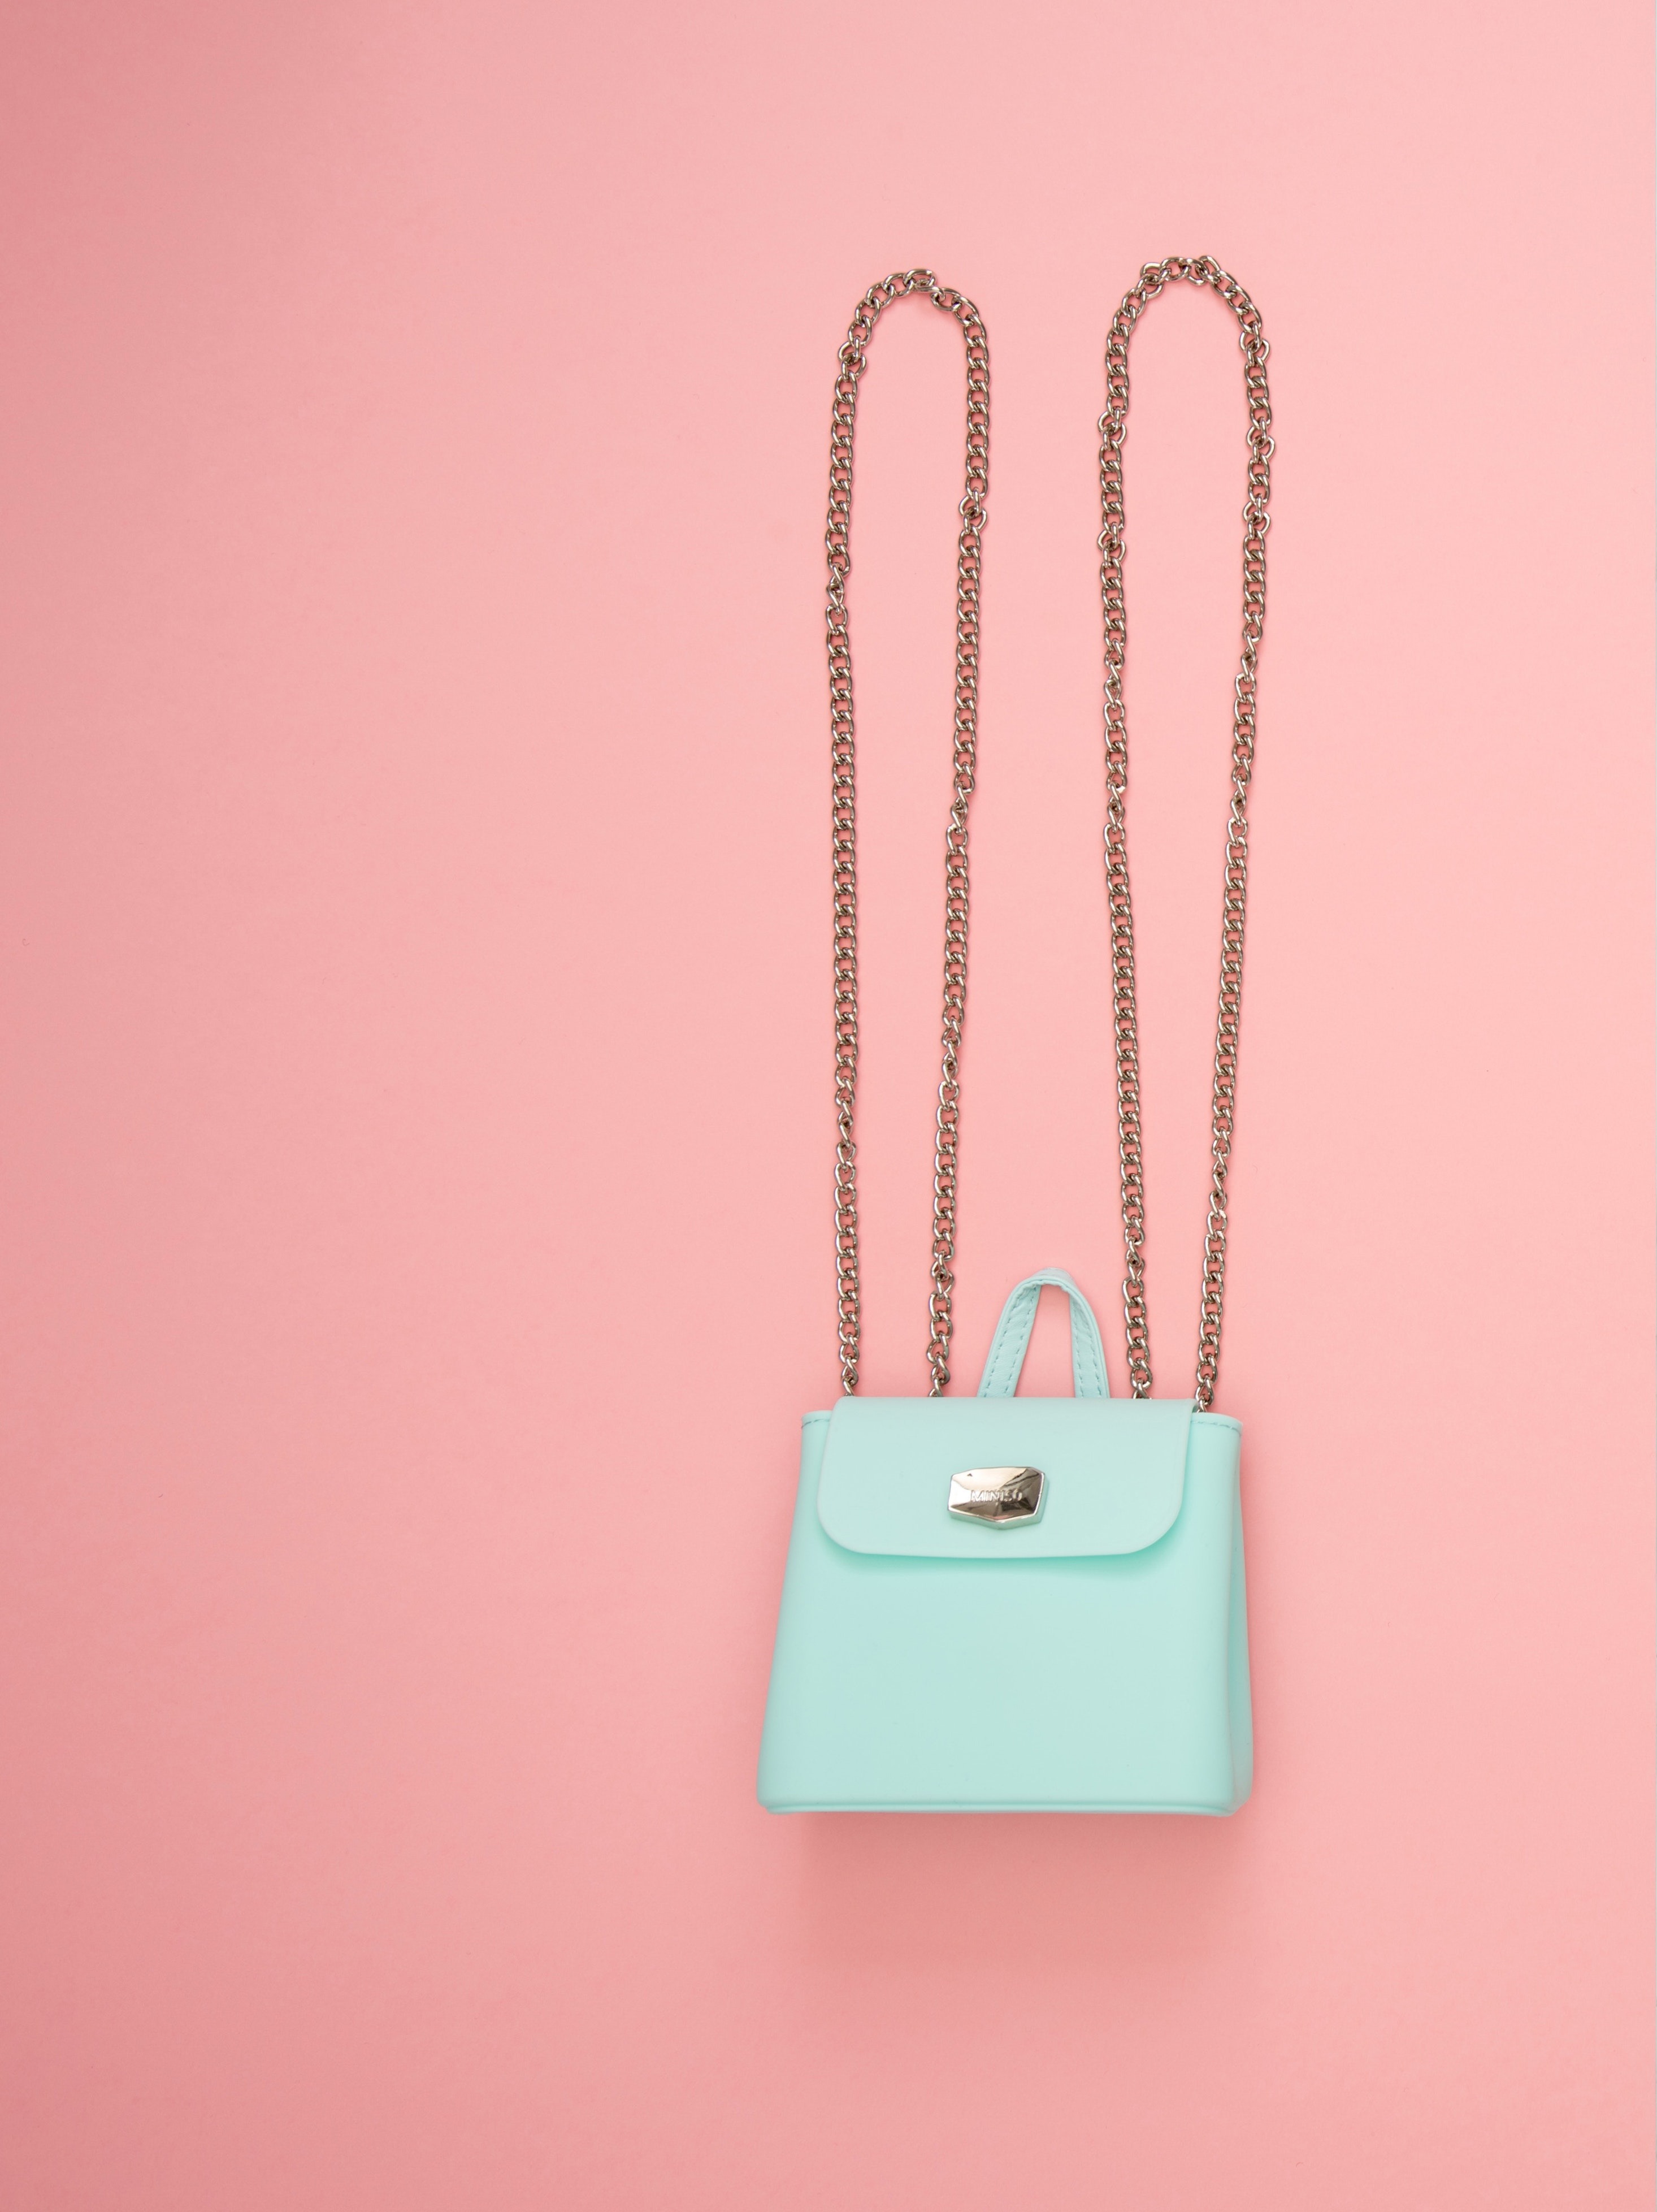 photo-of-two-teal-and-pink-leather-crossbody-bags-1038000_-_part_1.jpg